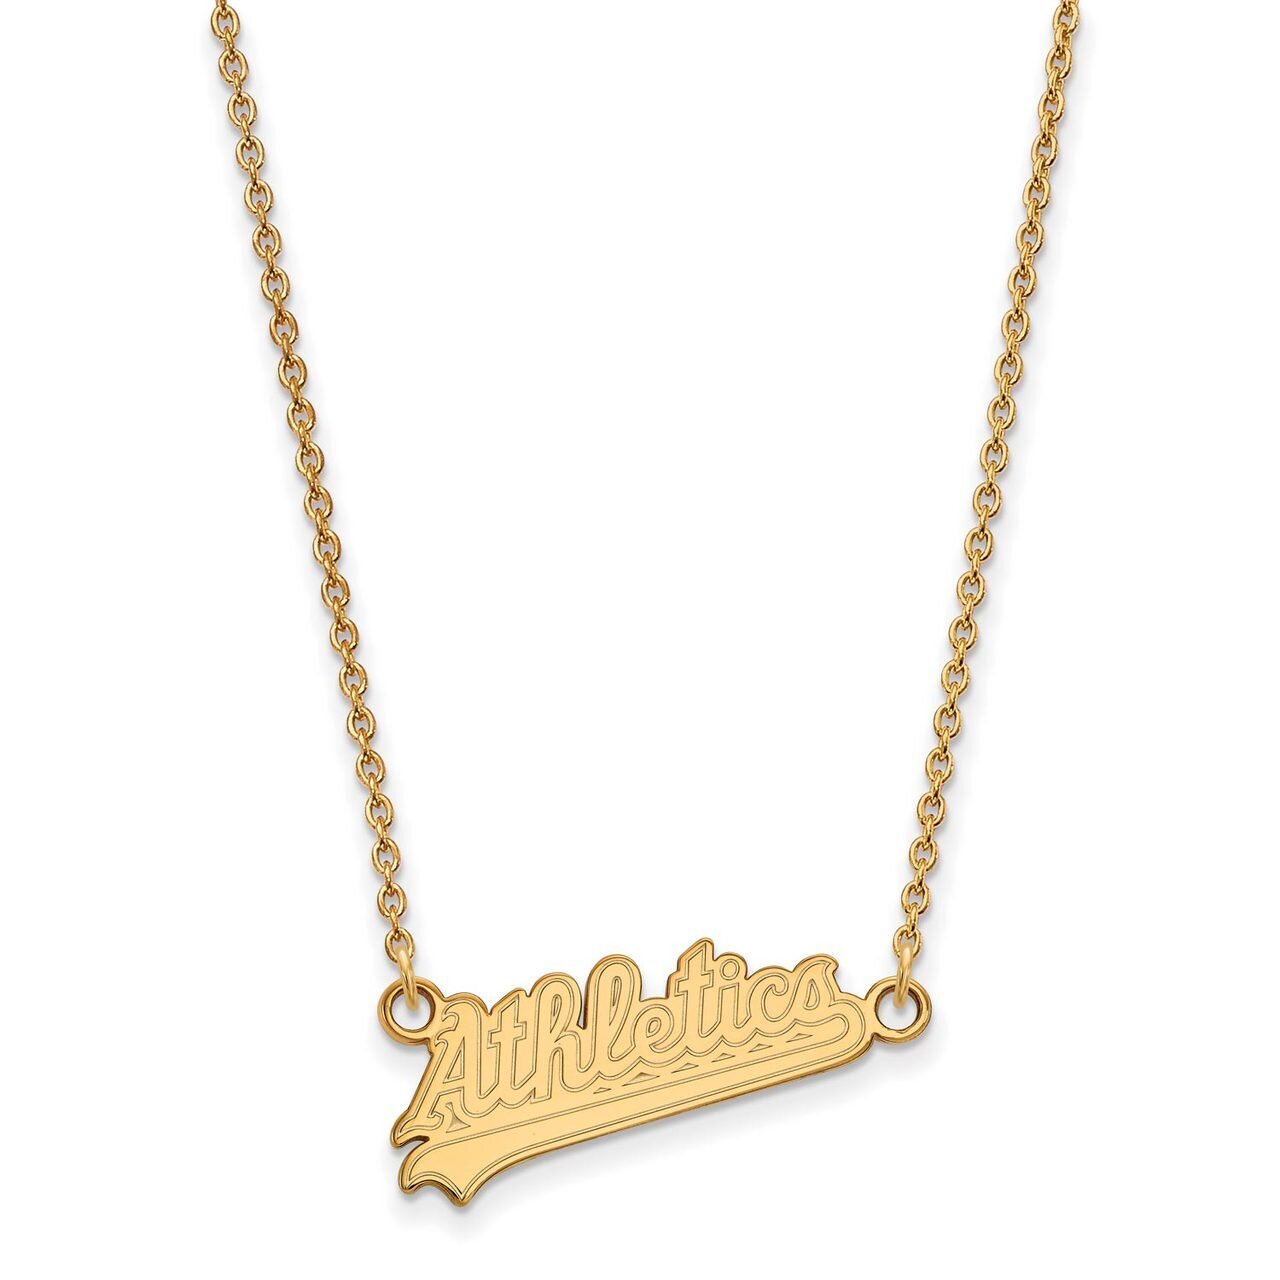 Oakland Athletics Small Pendant with Chain Necklace Gold-plated Silver GP016ATH-18